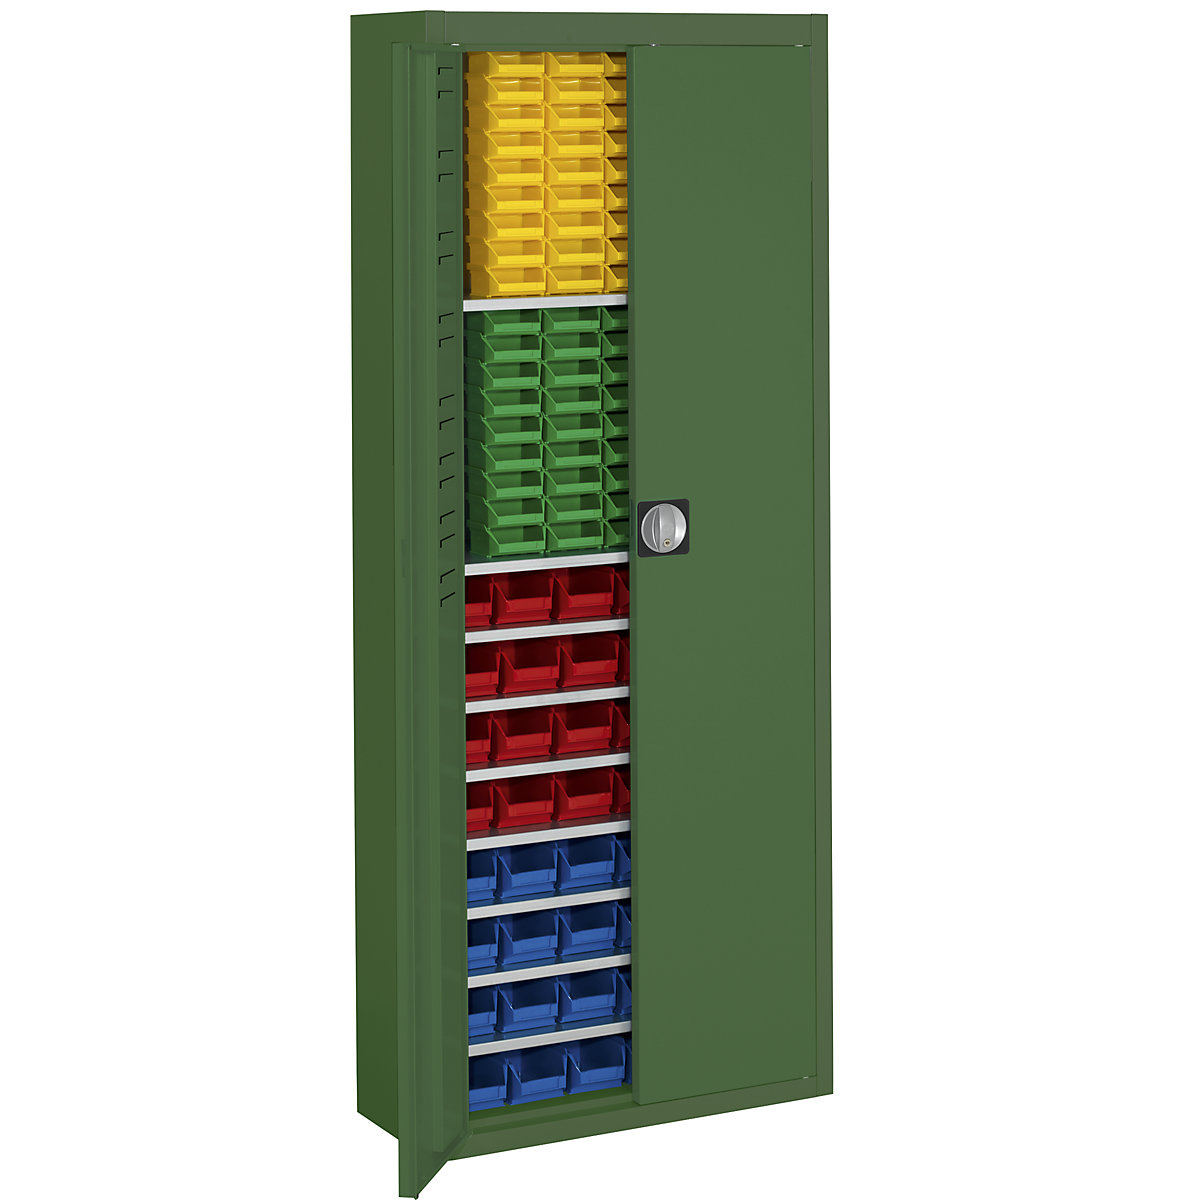 Storage cupboard with open fronted storage bins – mauser, HxWxD 1740 x 680 x 280 mm, single colour, green, 138 bins-3